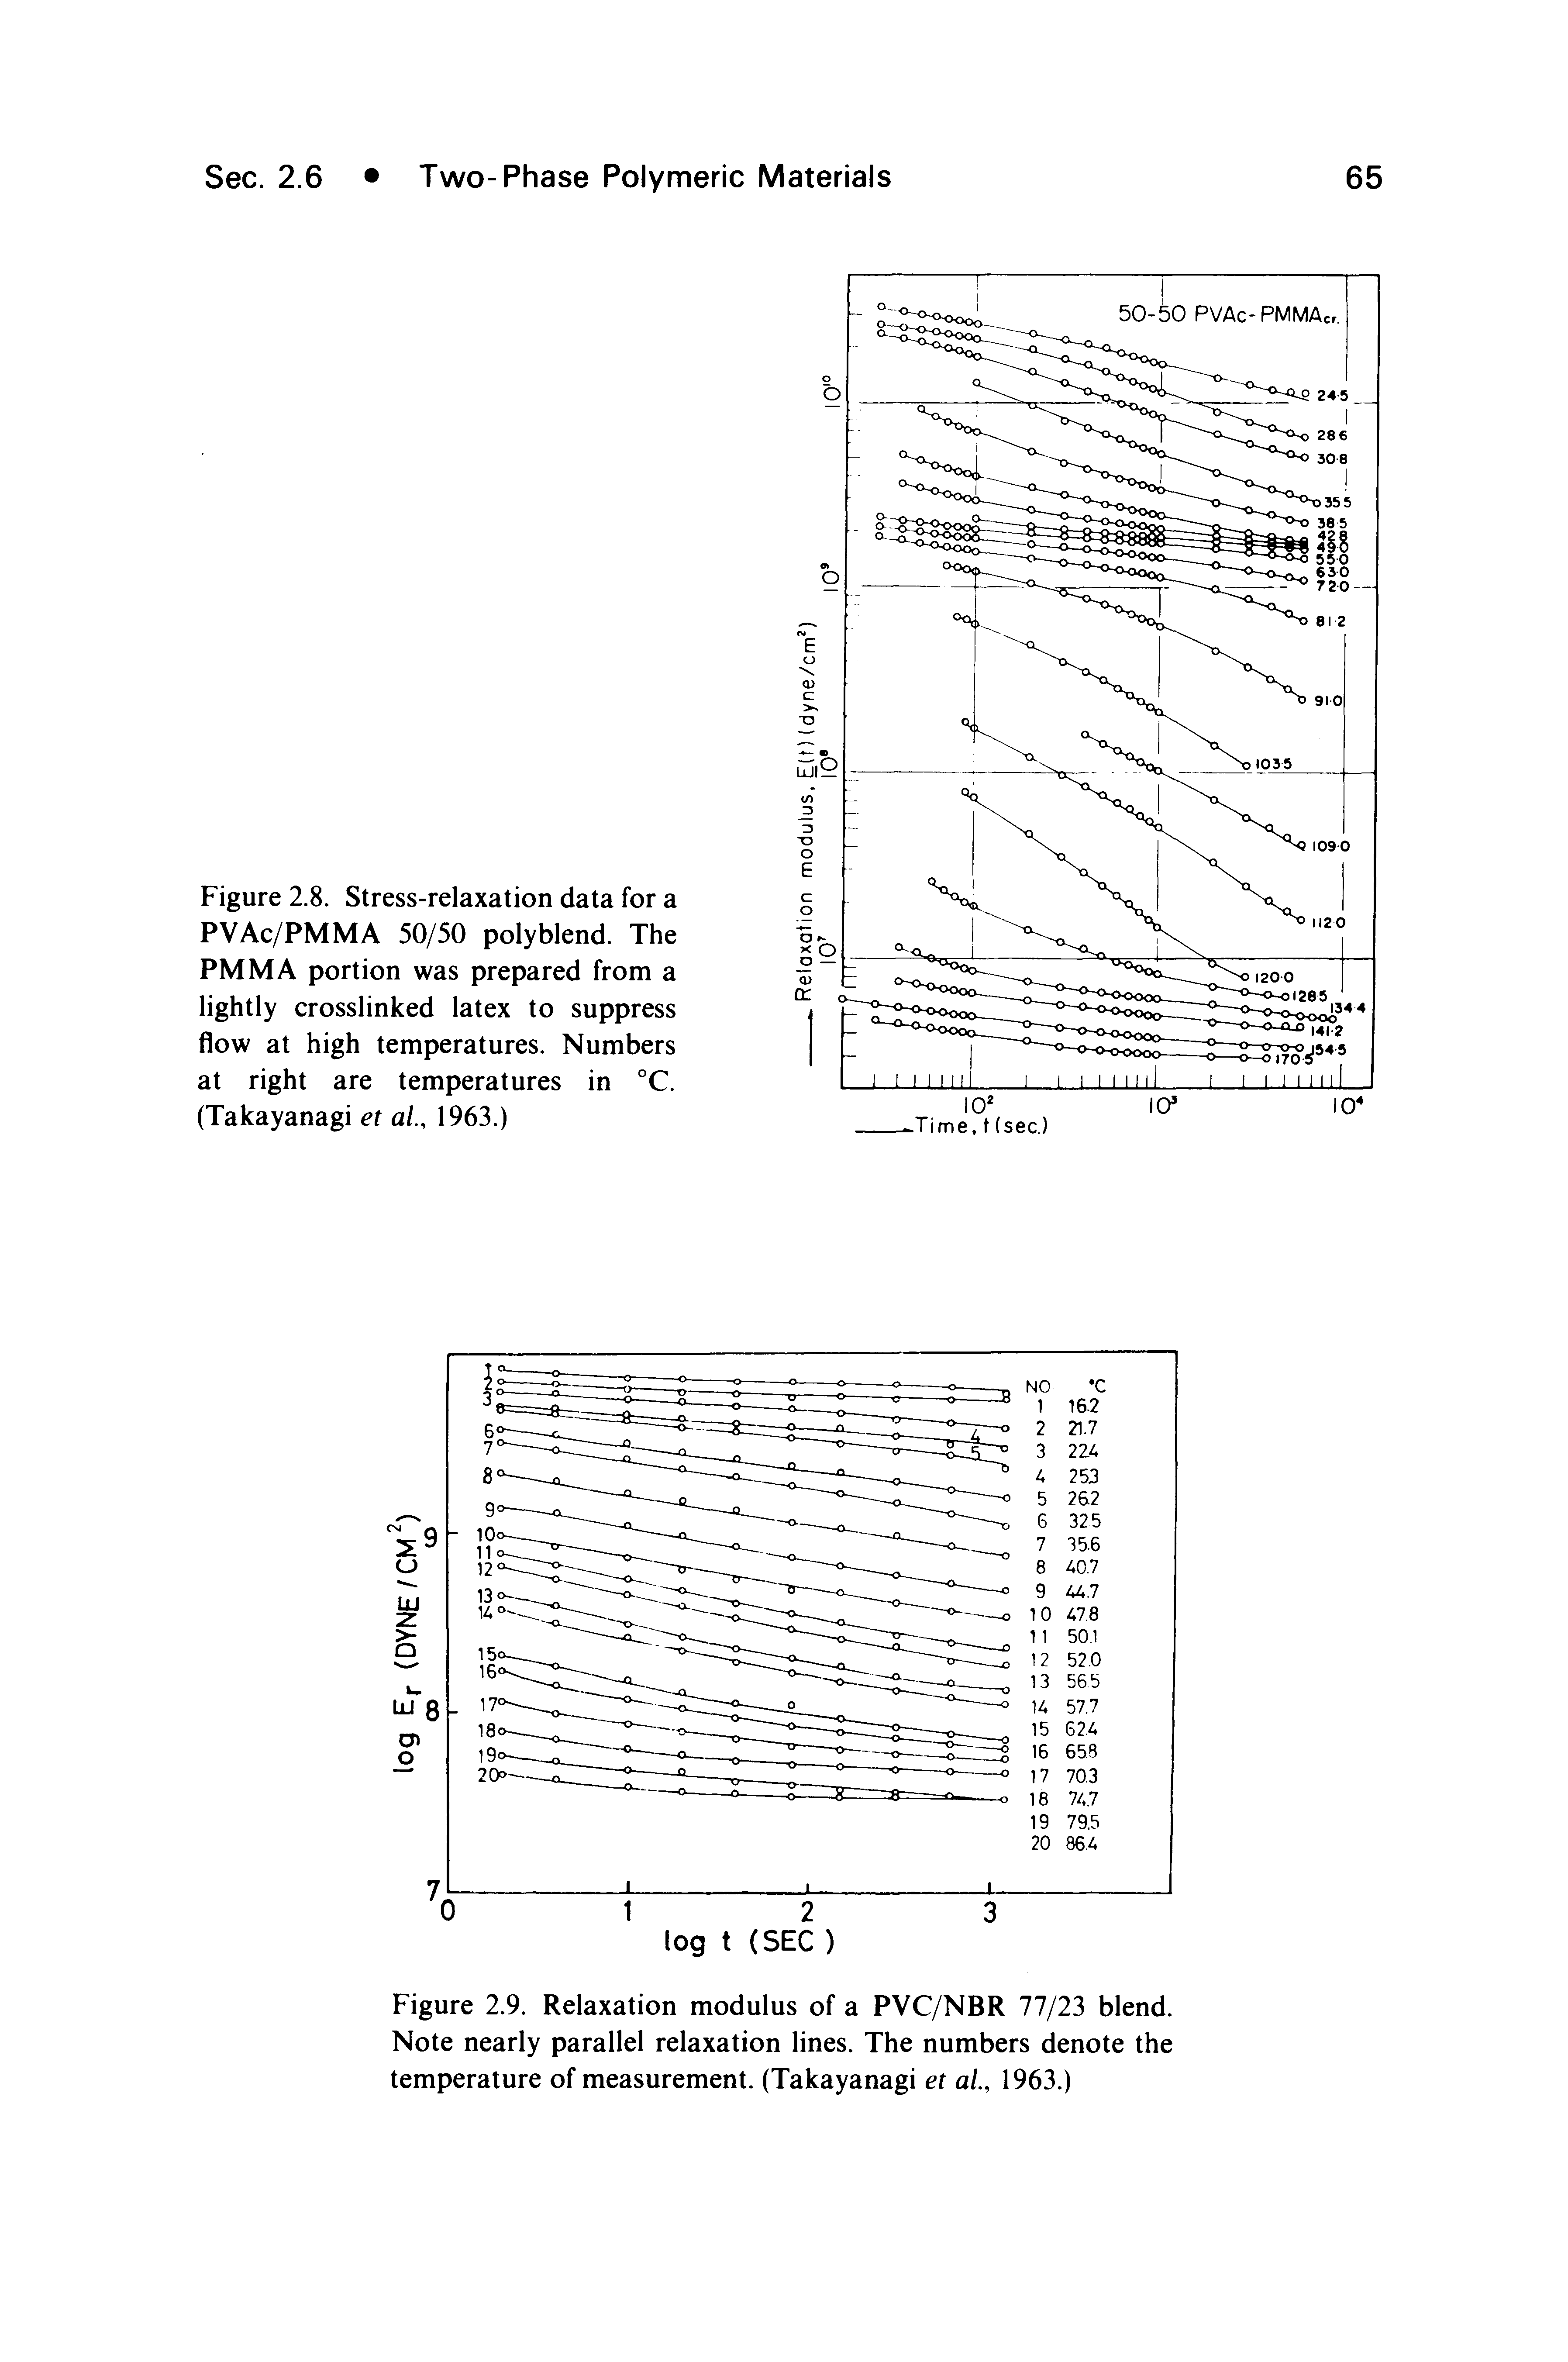 Figure 2.8. Stress-relaxation data for a PVAc/PMMA 50/50 polyblend. The PMMA portion was prepared from a lightly crosslinked latex to suppress flow at high temperatures. Numbers at right are temperatures in °C. (Takayanagi et ai, 1963.)...